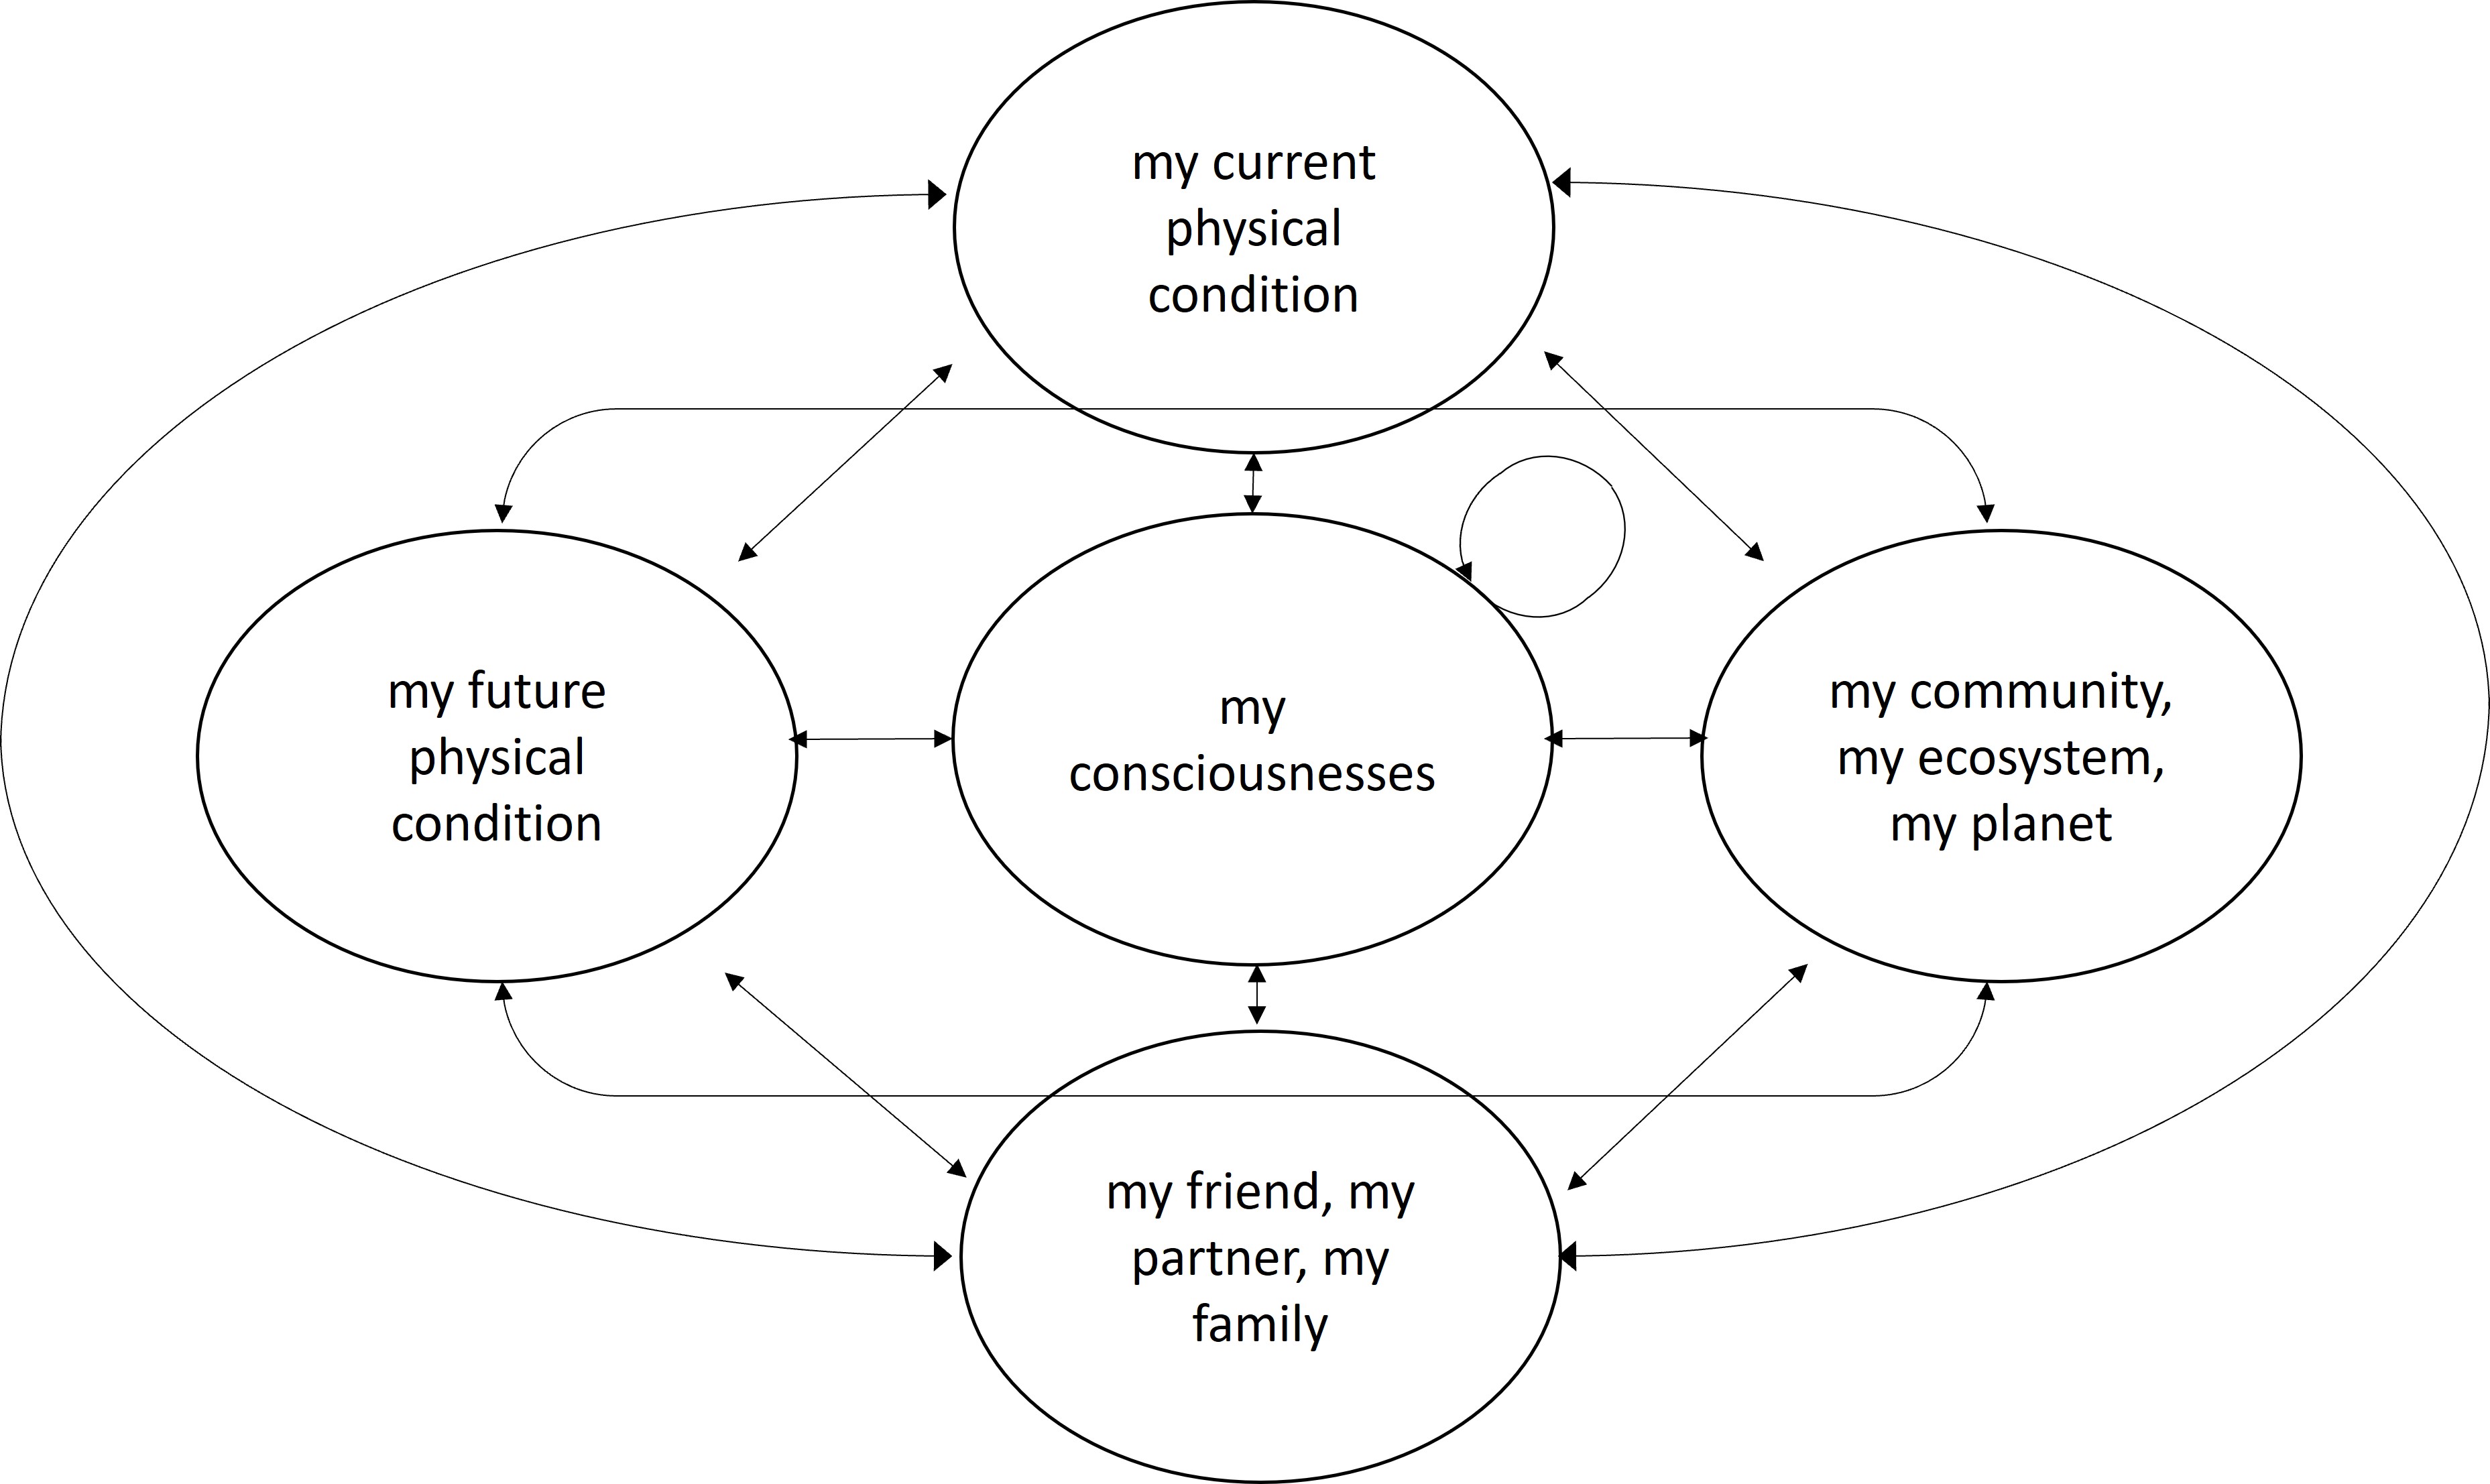 Diagram dislpaying the interconnected aspects of health; bubbles, each with arrows connecting them read: 'my consciousness', 'my current physical condition', 'my community, my ecosystem, my planet','my friend, my partner, my family', 'my future physical condition' 